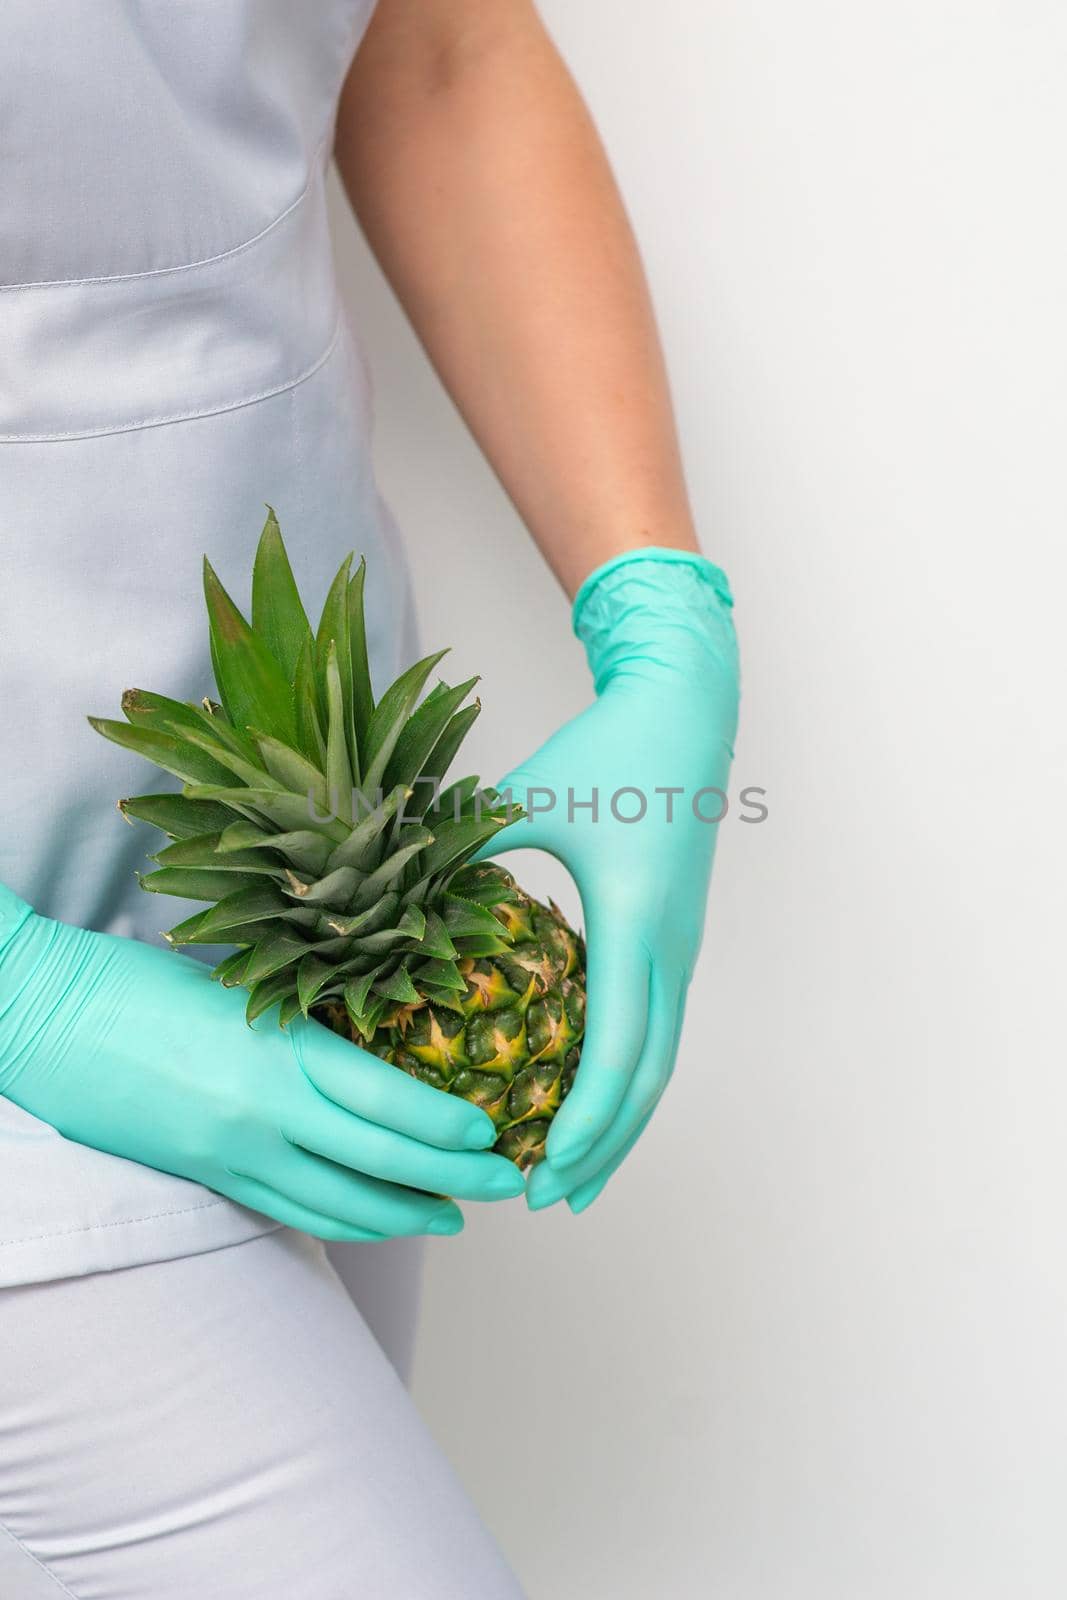 Young beautician wearing blue gloves in uniform with pineapple covers an intimate area on a white background, bikini zone depilation concept. by okskukuruza